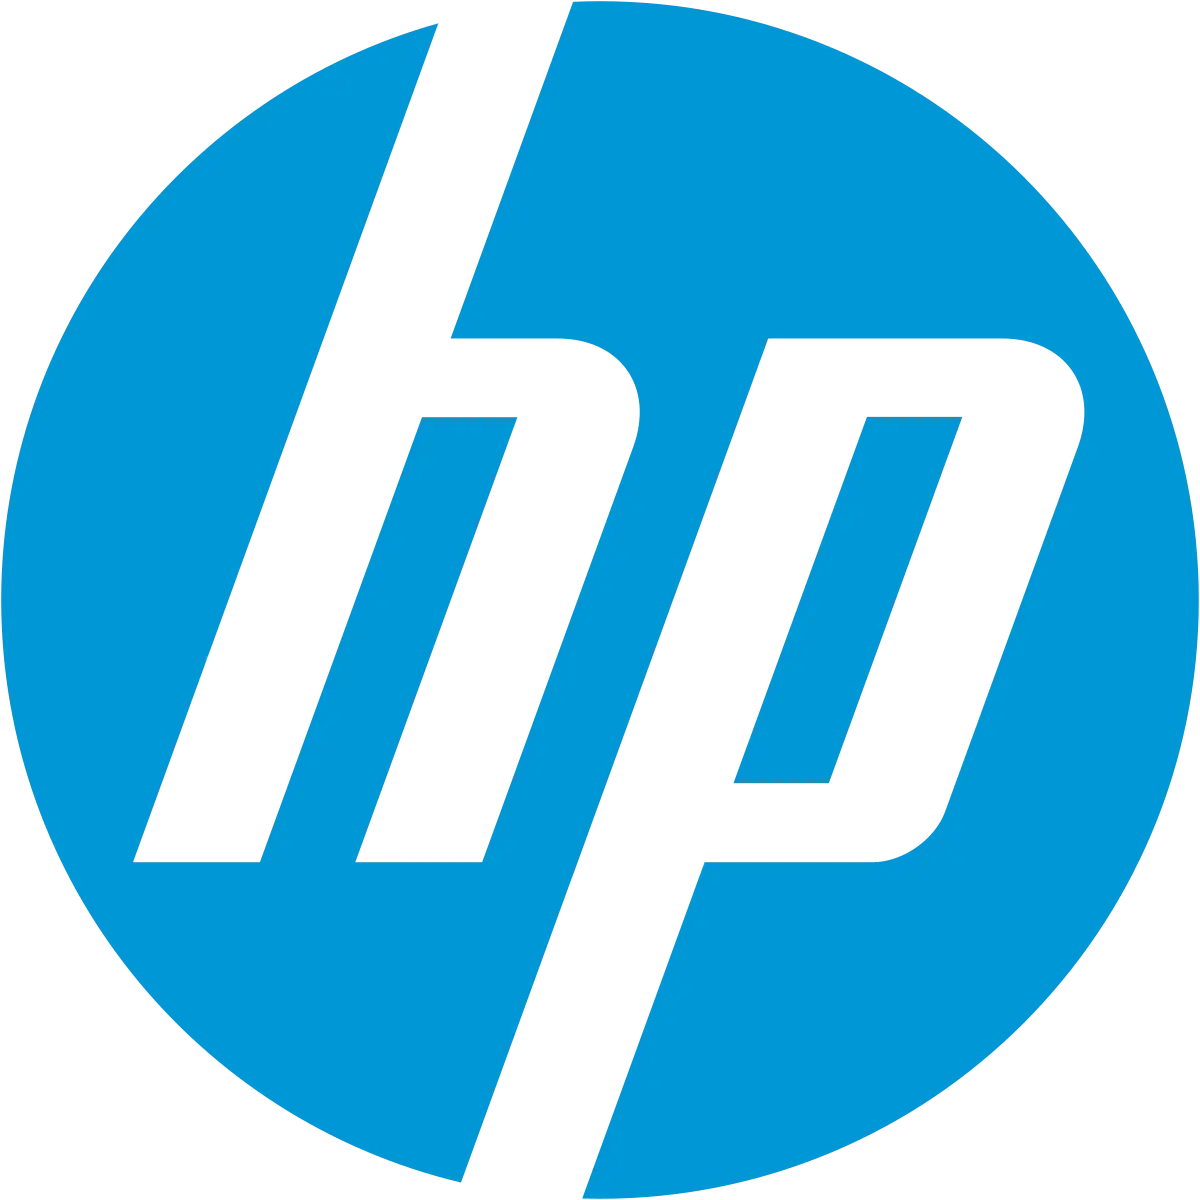 Hp subsidiaries: comprehensive overview of hewlett packard's global expansion